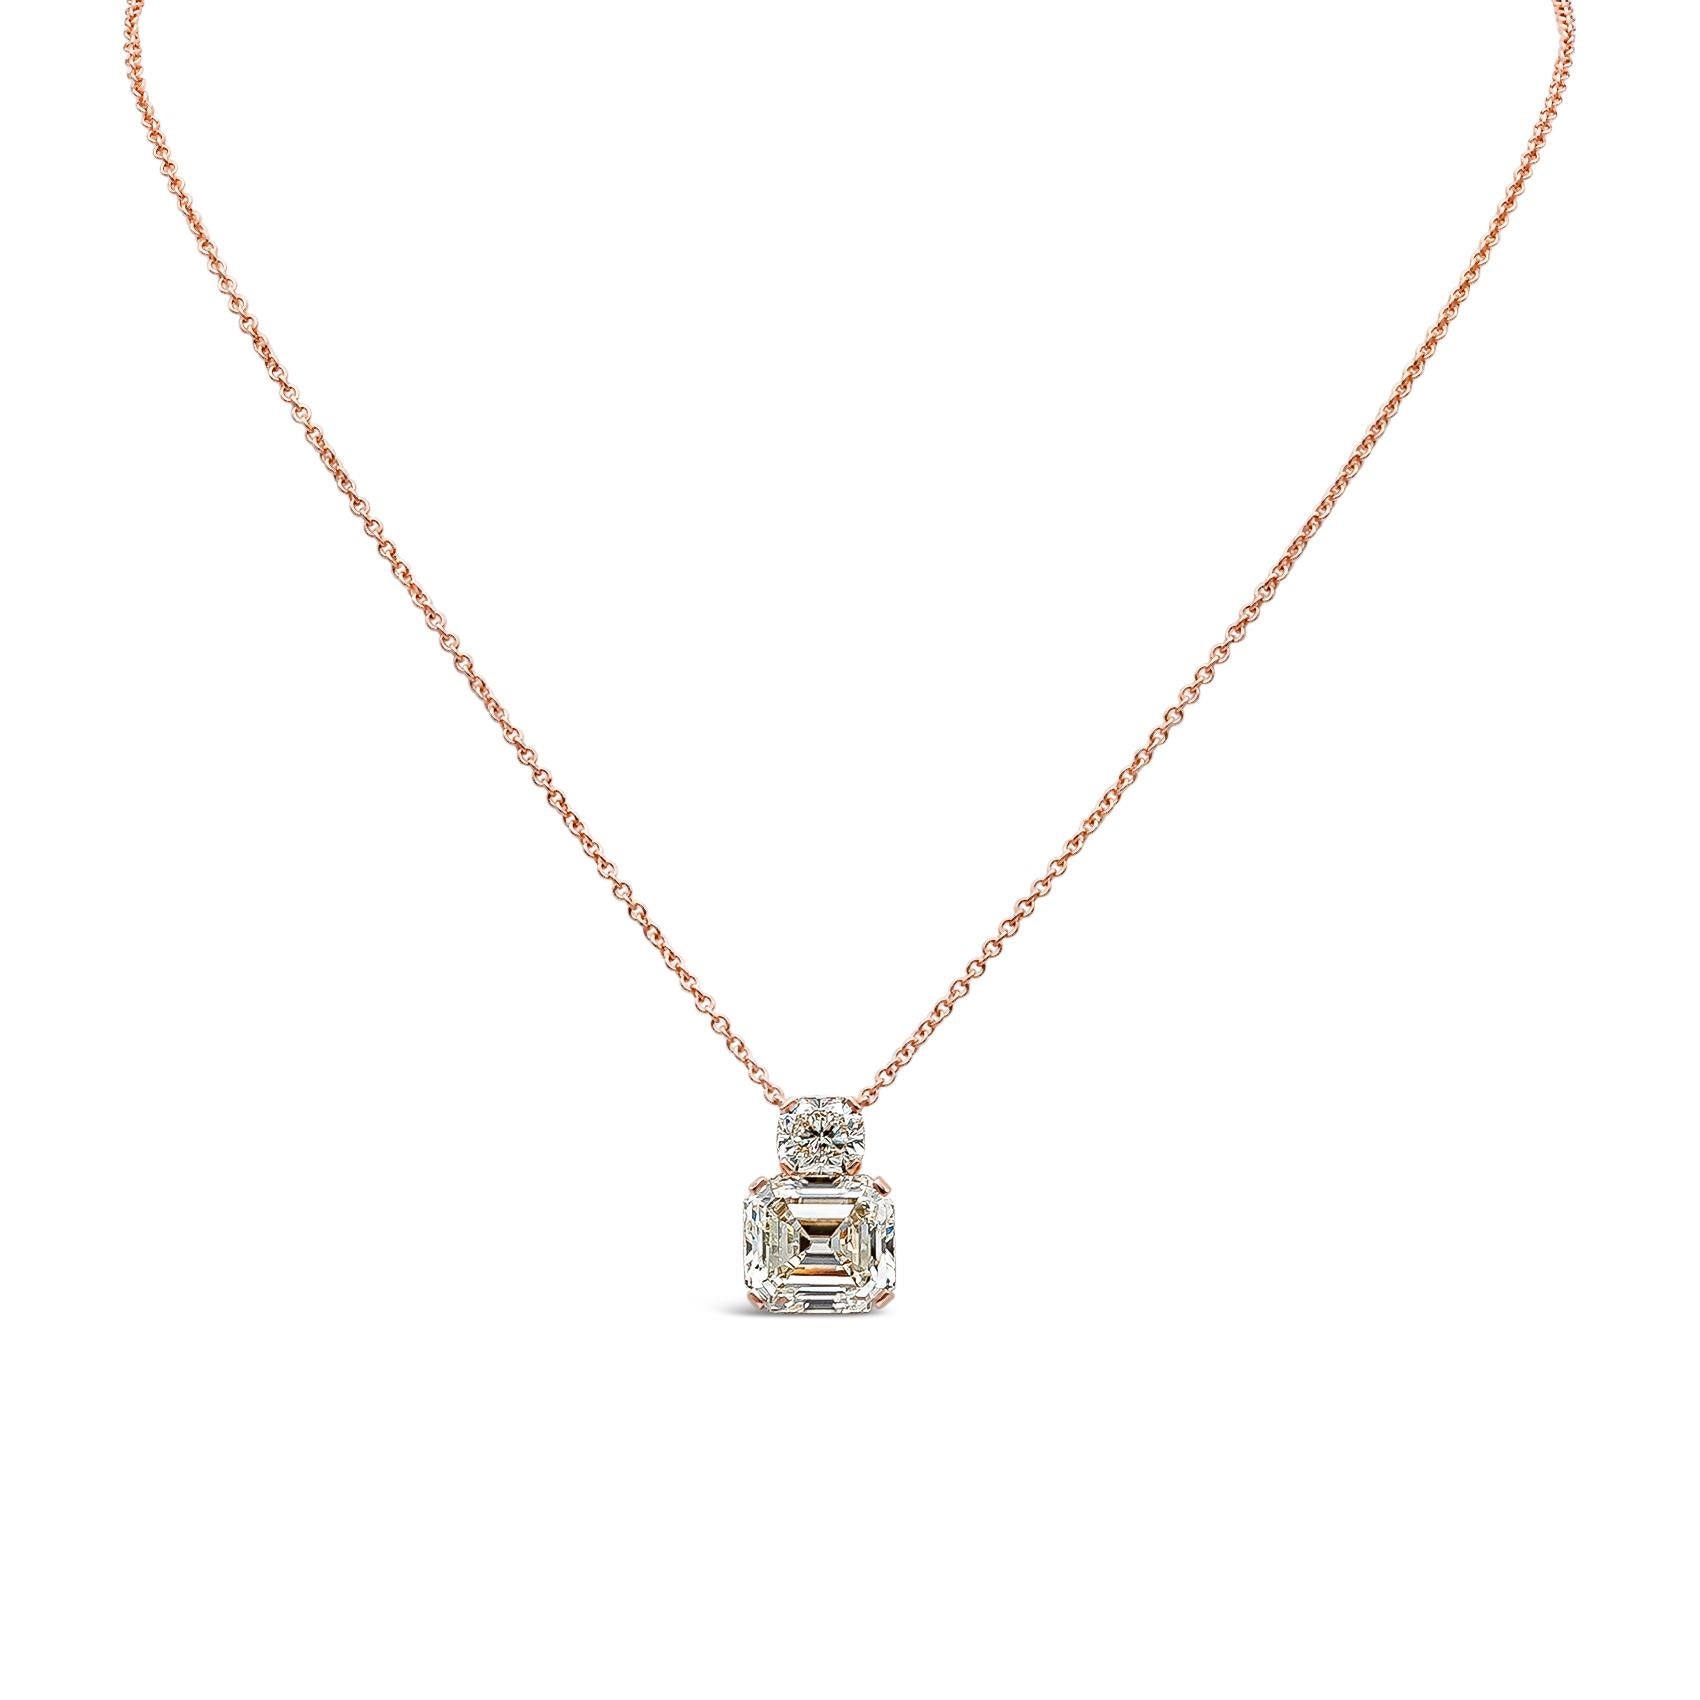 Well crafted high end pendant necklace showcasing GIA certified mixed emerald and radiant cut diamonds, N color and VS2 in clarity, elegantly suspended with each other. Emerald cut weighs 7.81 carats and the radiant cut diamond weighs 1.45 carats.